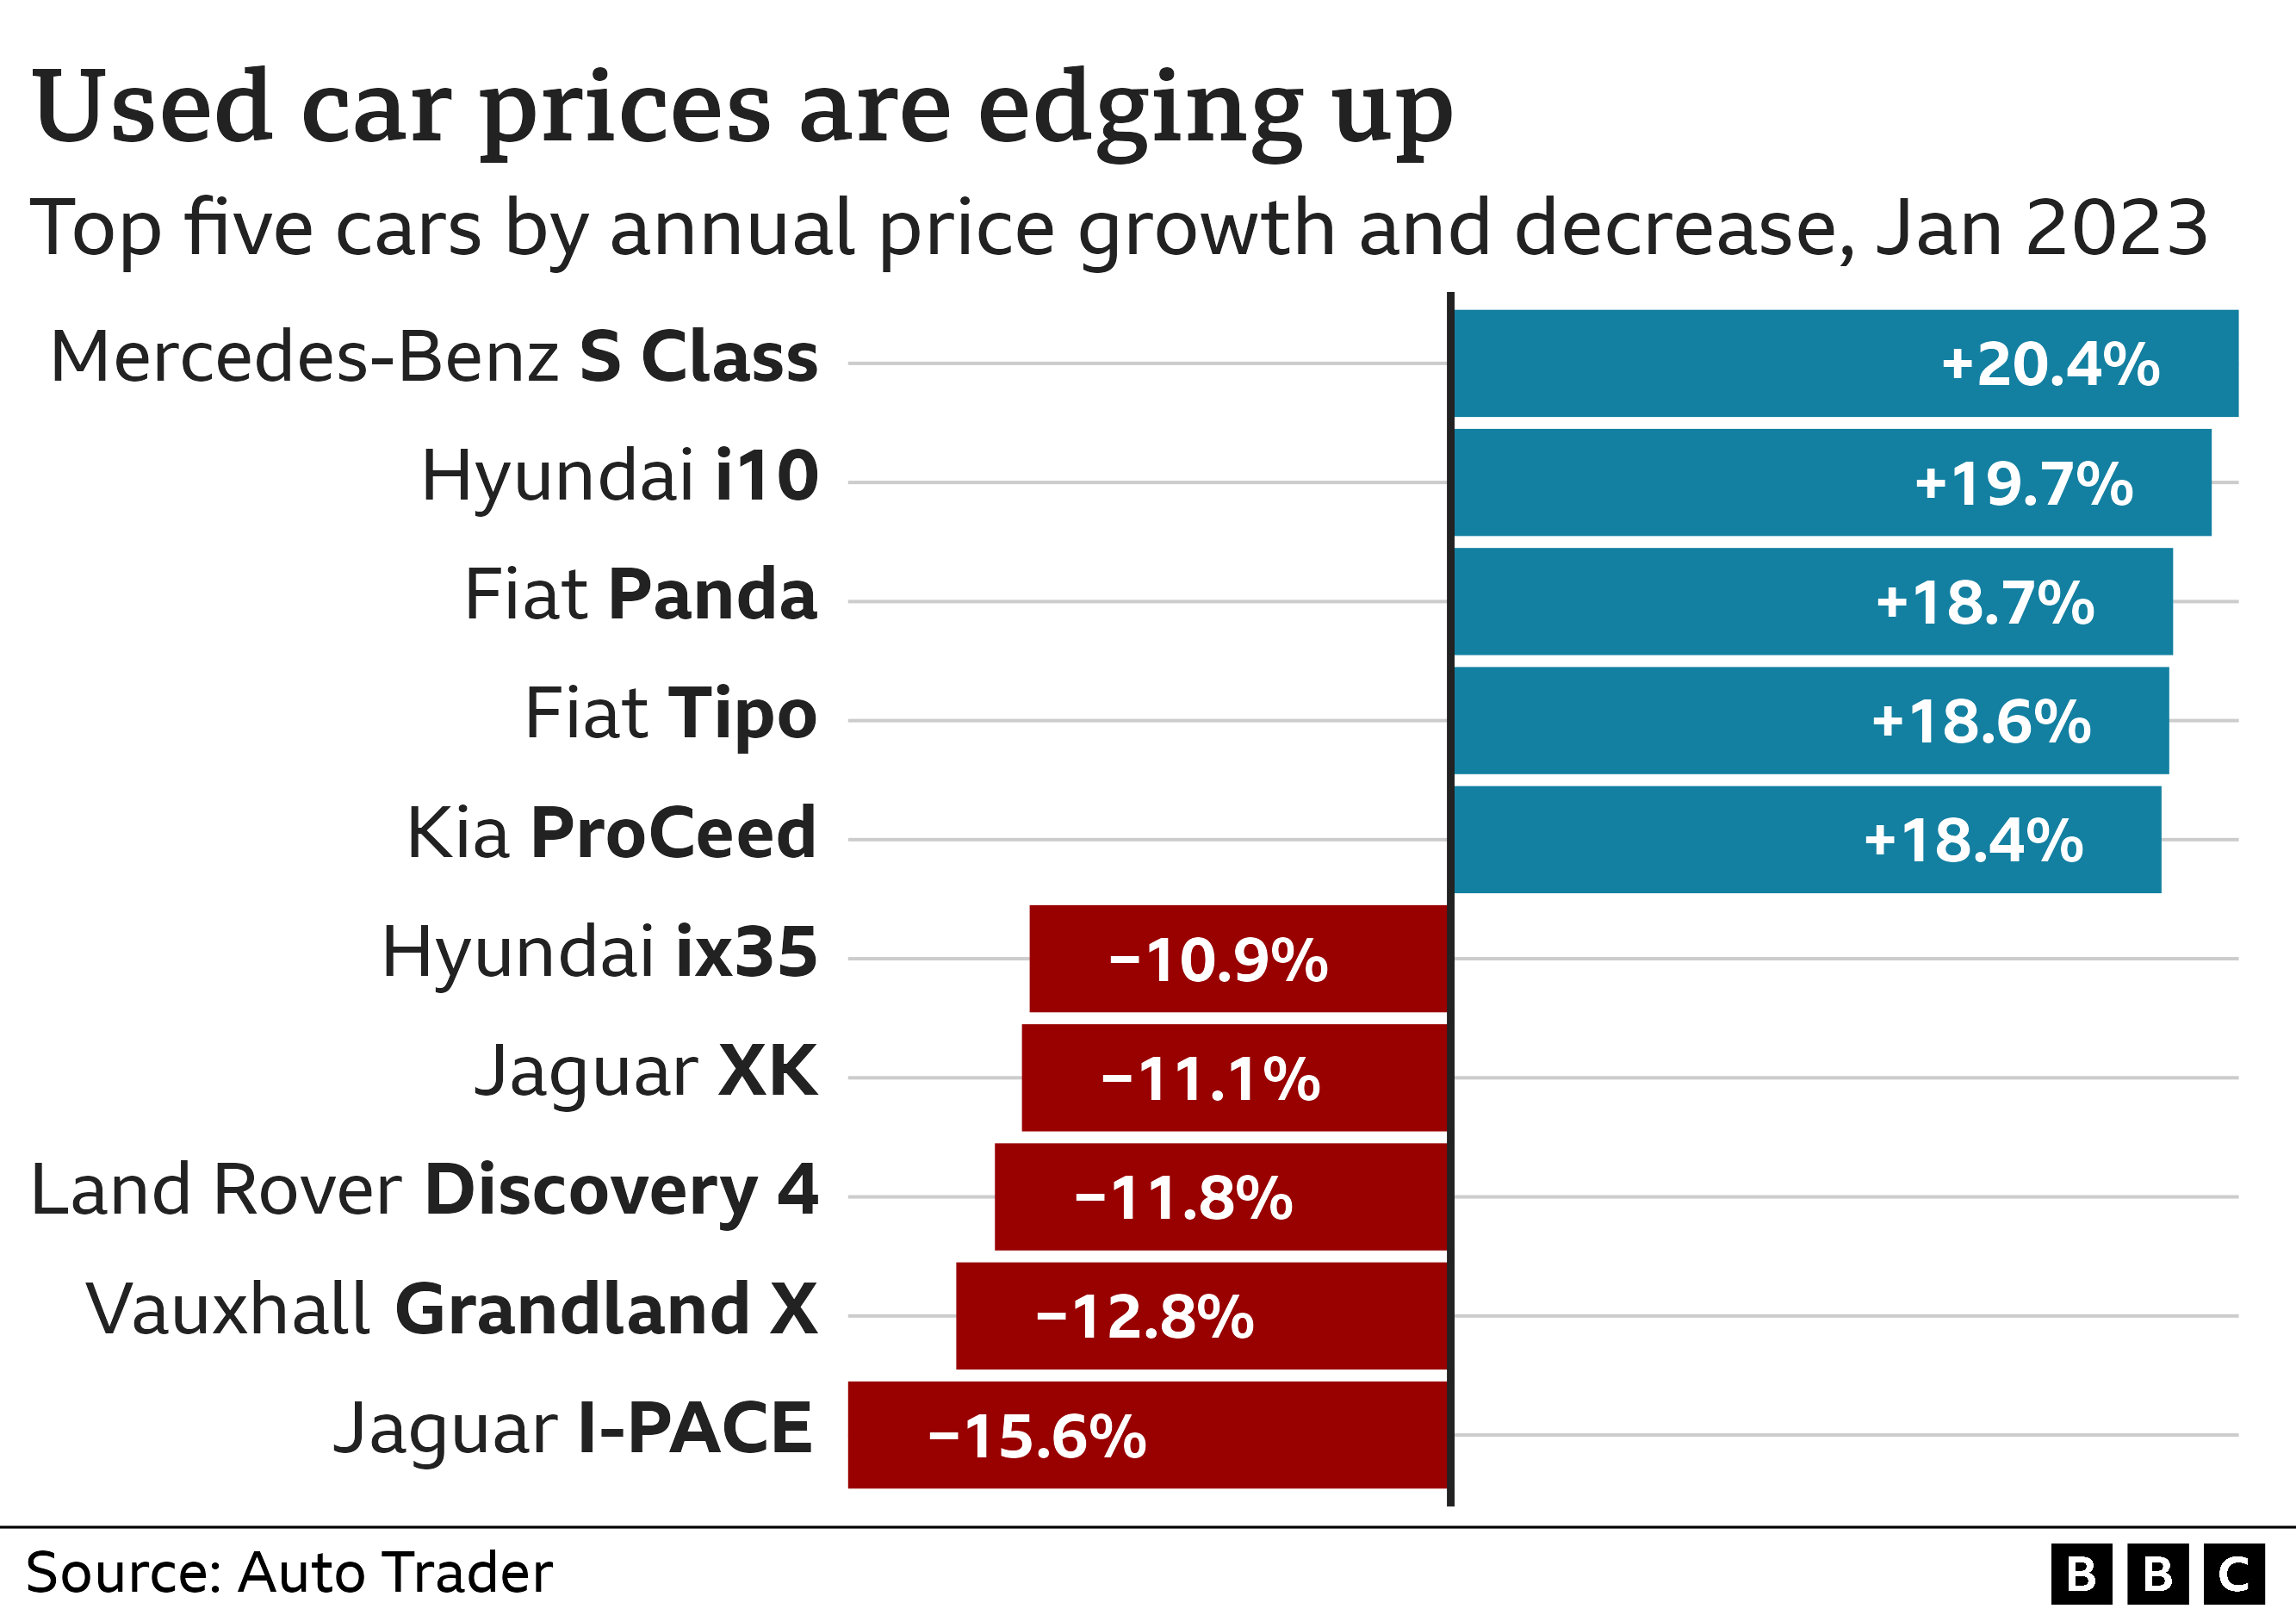 Bar chart showing the annual change in price for used cars. Mercedes-Benz S Class saw the biggest increase at 20.4%, while Jaguar I-PACE cars became 15.6% cheaper.